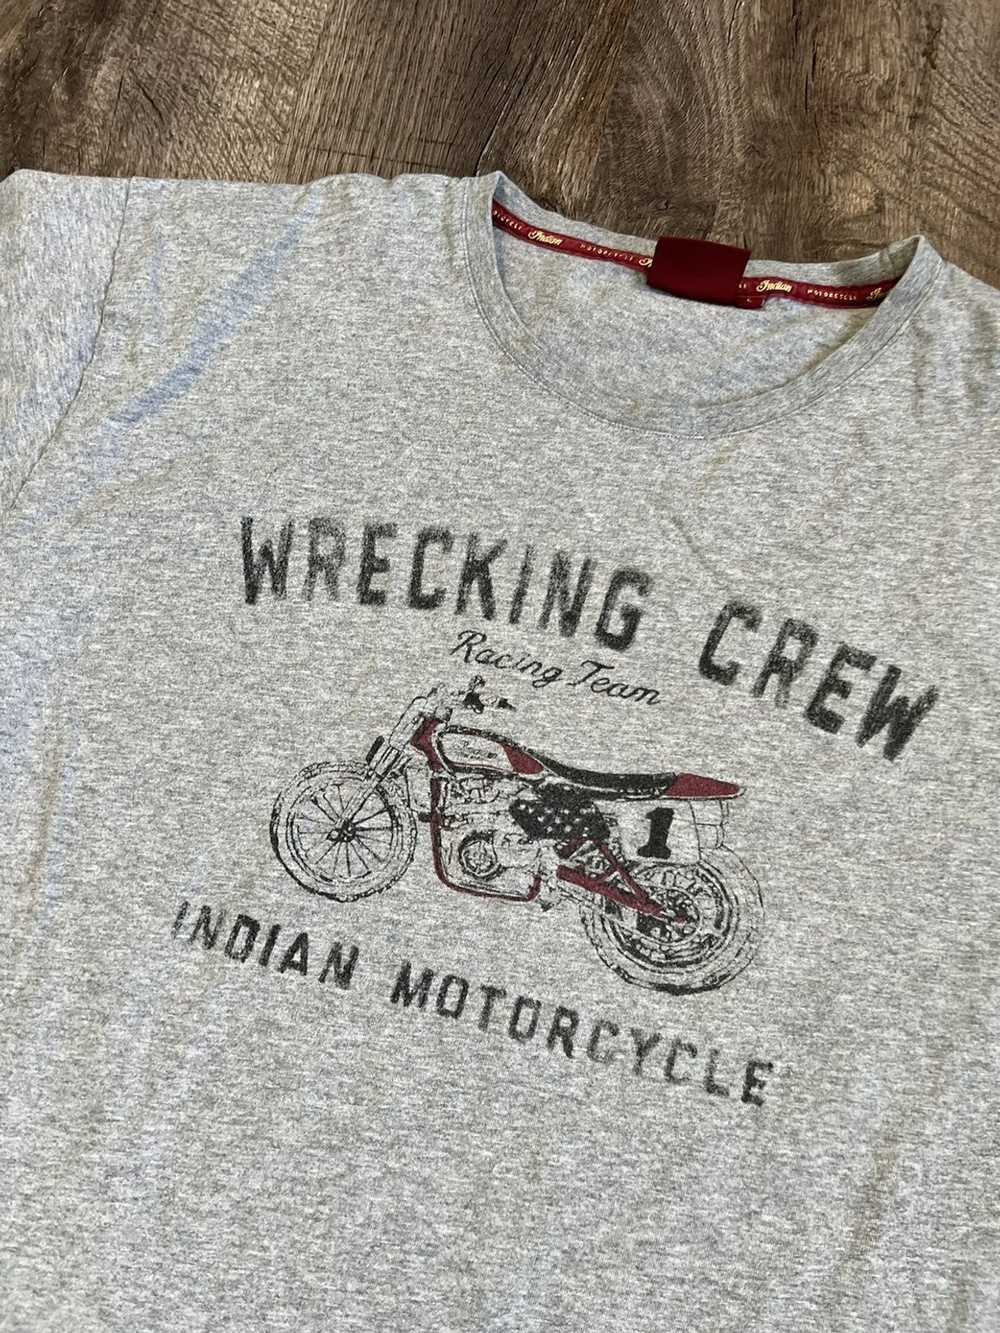 Indian Motercycles Indian Motorcycles Shirt - image 2